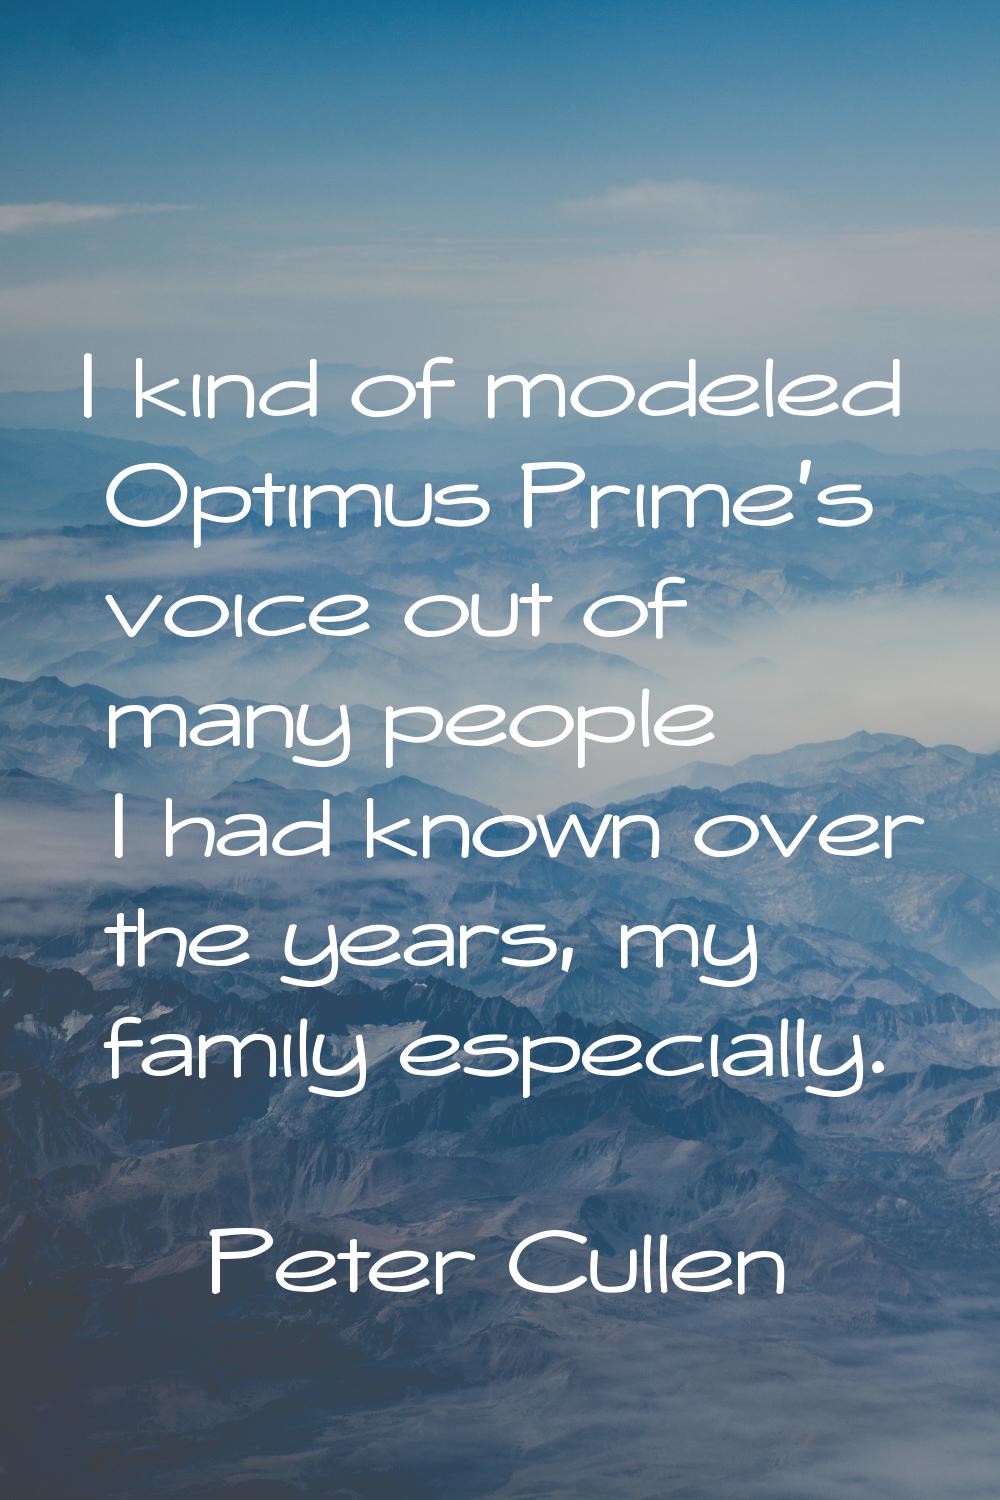 I kind of modeled Optimus Prime's voice out of many people I had known over the years, my family es